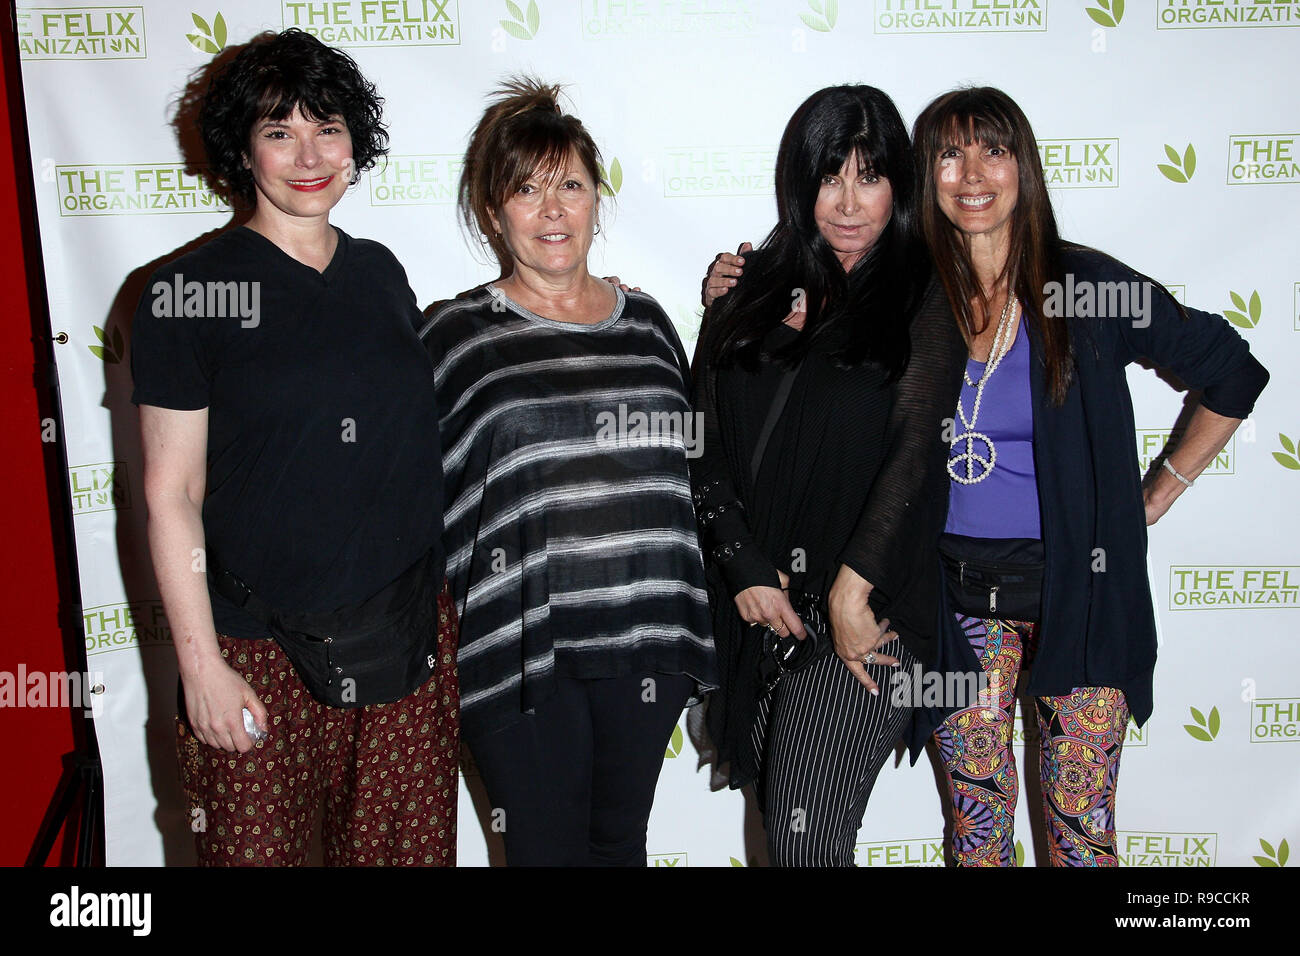 NEW YORK, NY - MAY 15:  Actress Terri Garber, Felix Co-founders Sheila Jaffe, Myra Scheer and Judy Taylor attend the 2016 'Dance This Way' Dance-A-Thon Benefit hosted by The Felix Organization on May 15, 2016 in New York, New York.  (Photo by Steve Mack/S.D. Mack Pictures) Stock Photo